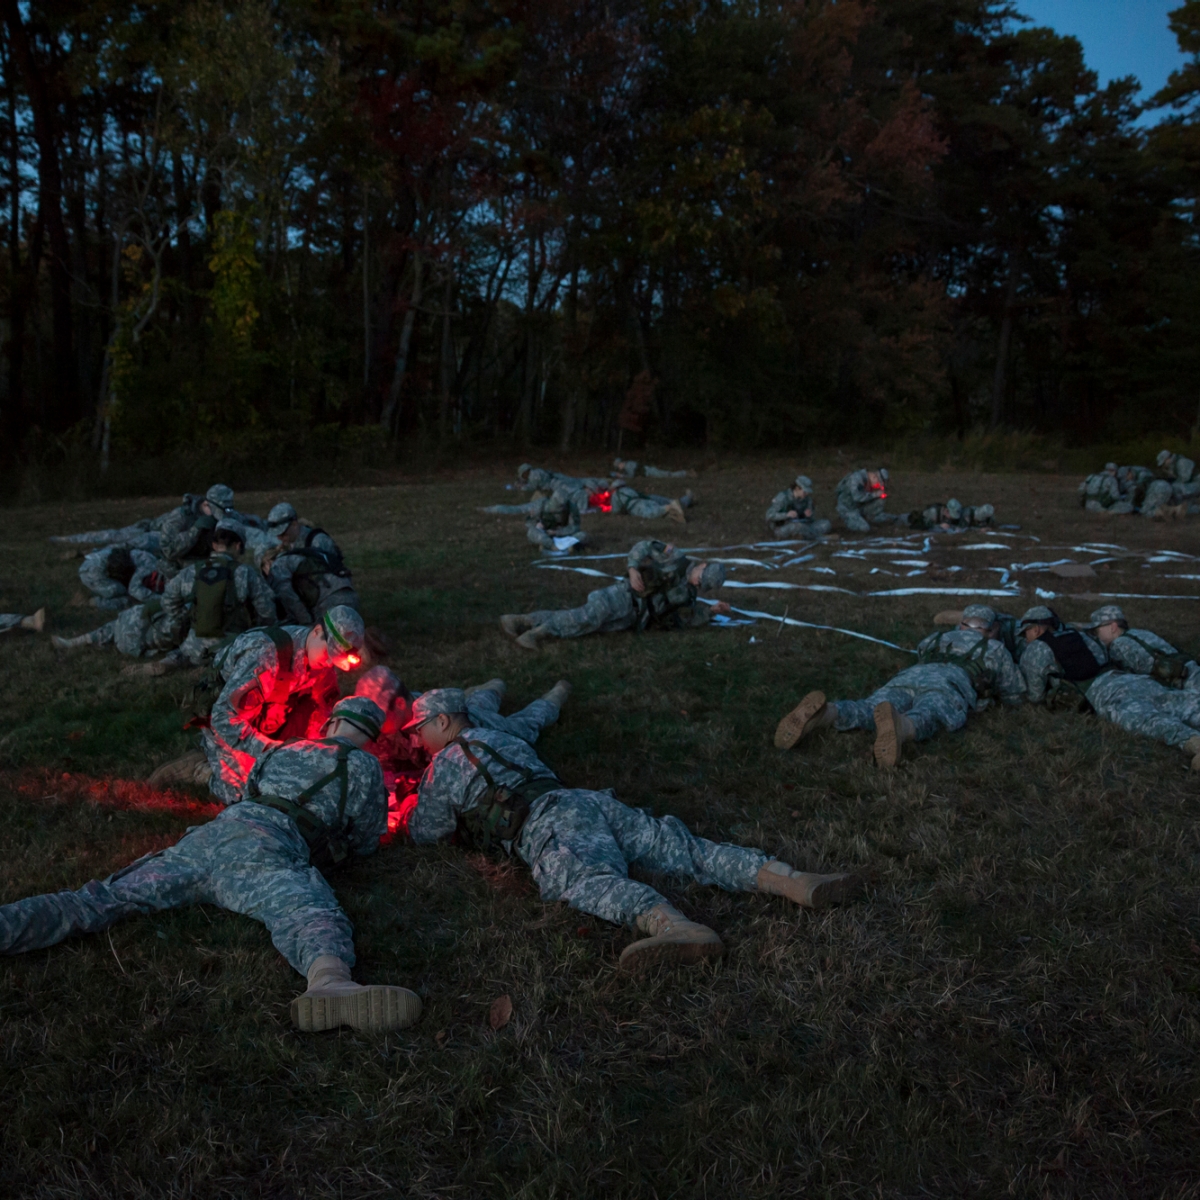 Photo of soldiers performing drills, from Lea Winkler, ROTC: Land Navigation, 2016